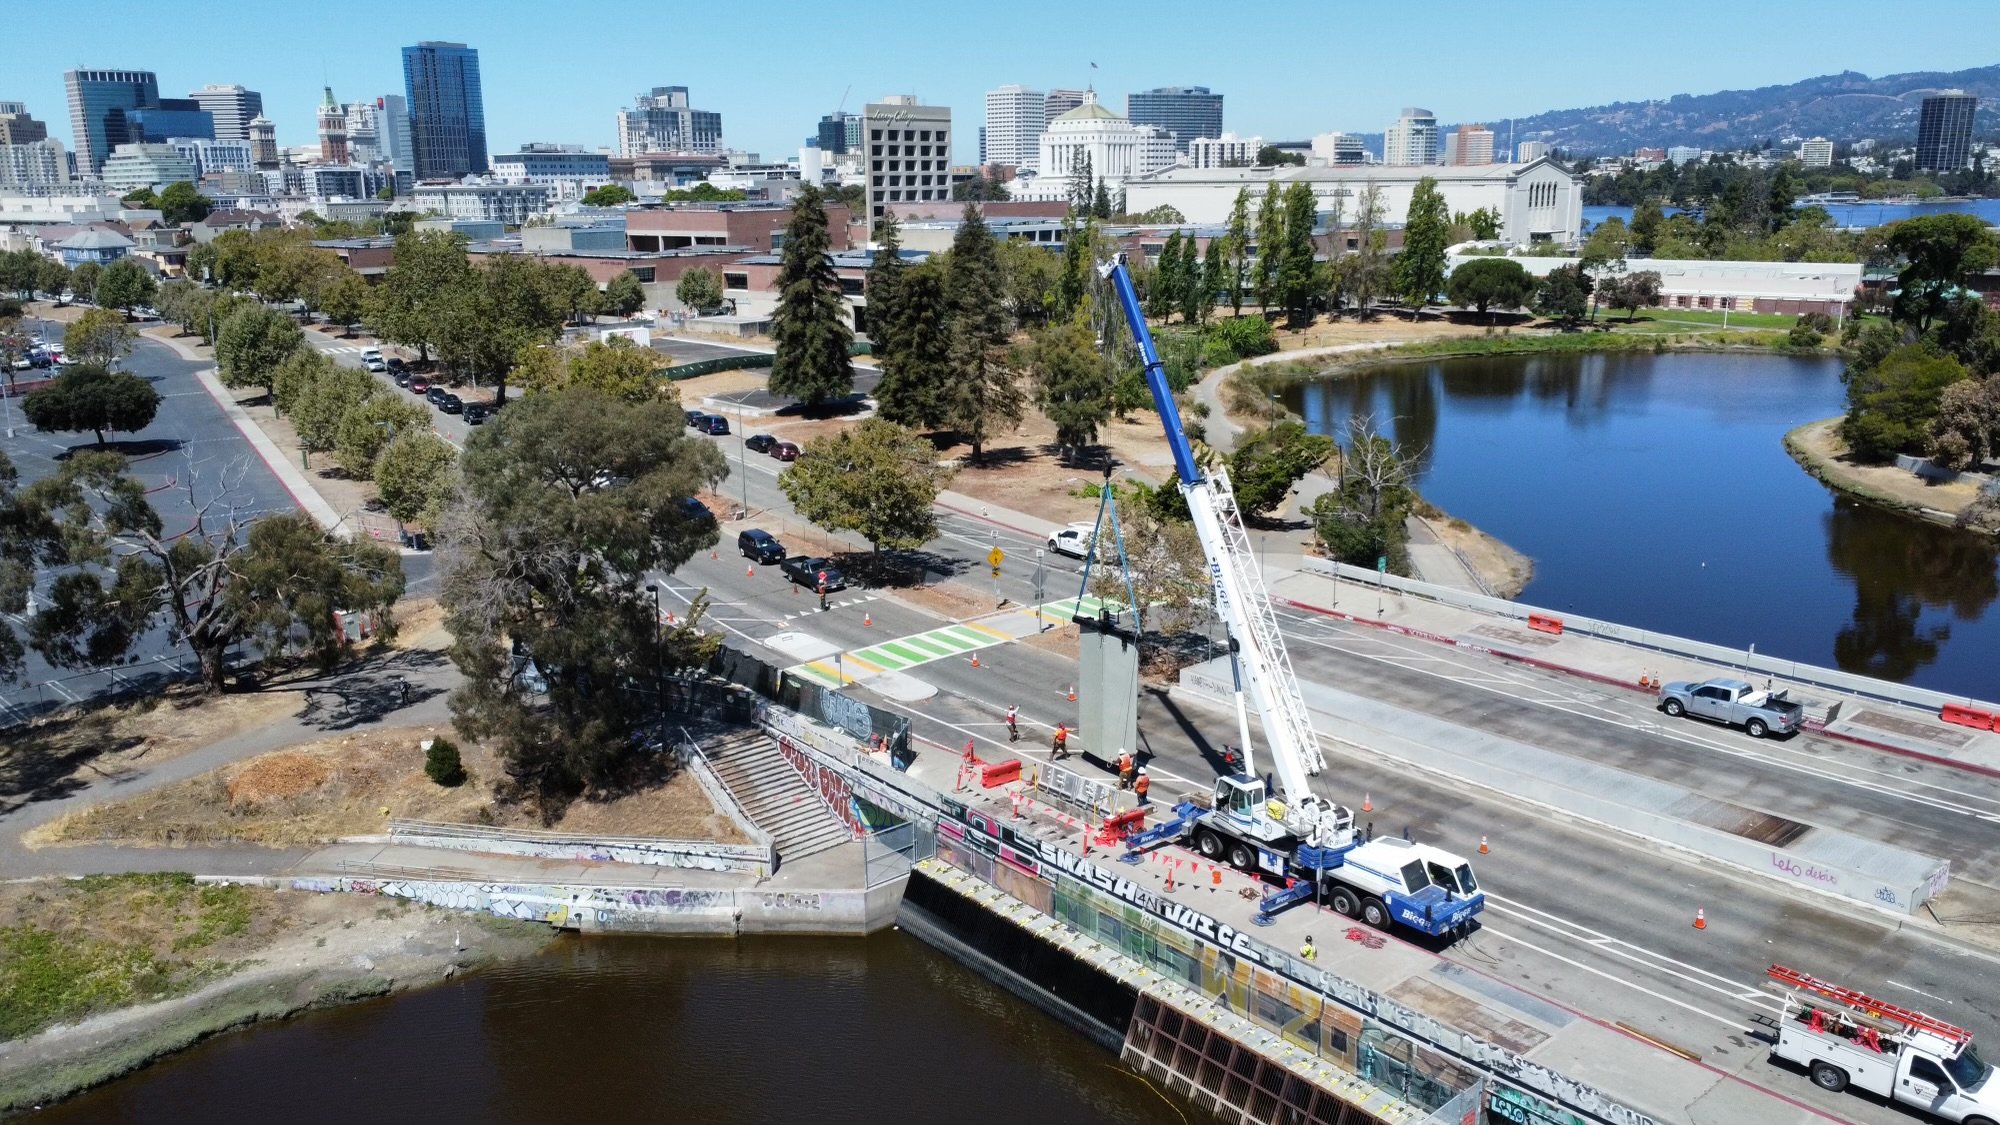   Welcome To Valentine Corporation   Project: Lake Merritt Pump Station Channel Gate &amp; Trash Rack Rehabilitation - Alameda County Public Works  If It's Difficult Or Unusual, Call Us!   Contact Us  